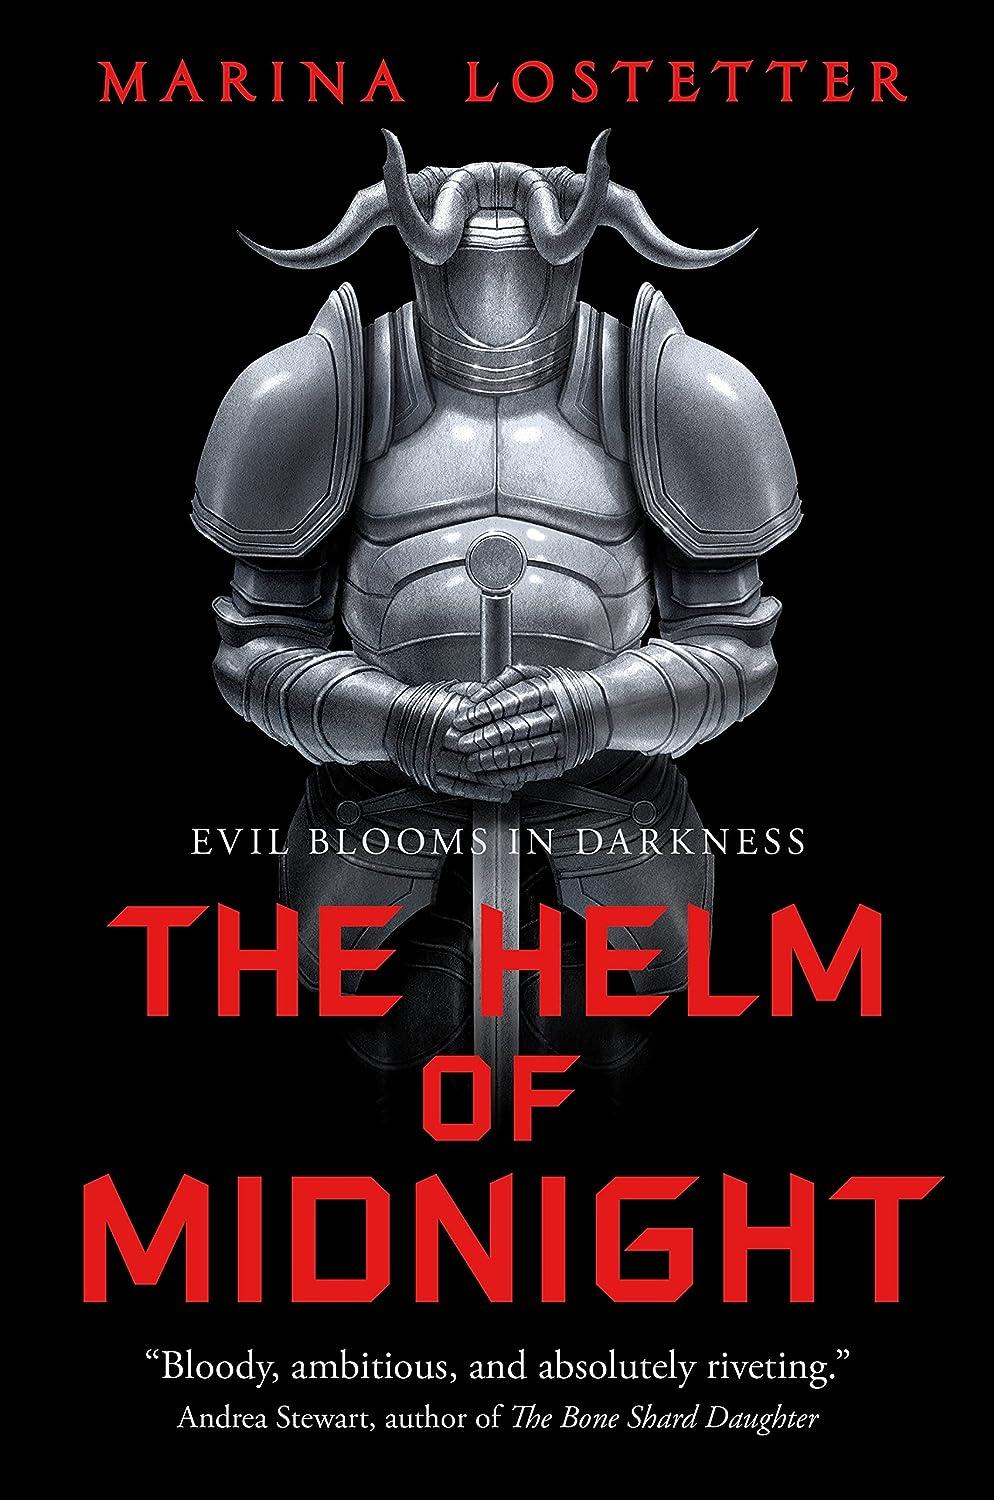 helm of midnight evil blooms in darkness  marina lostetter 978-1250258748